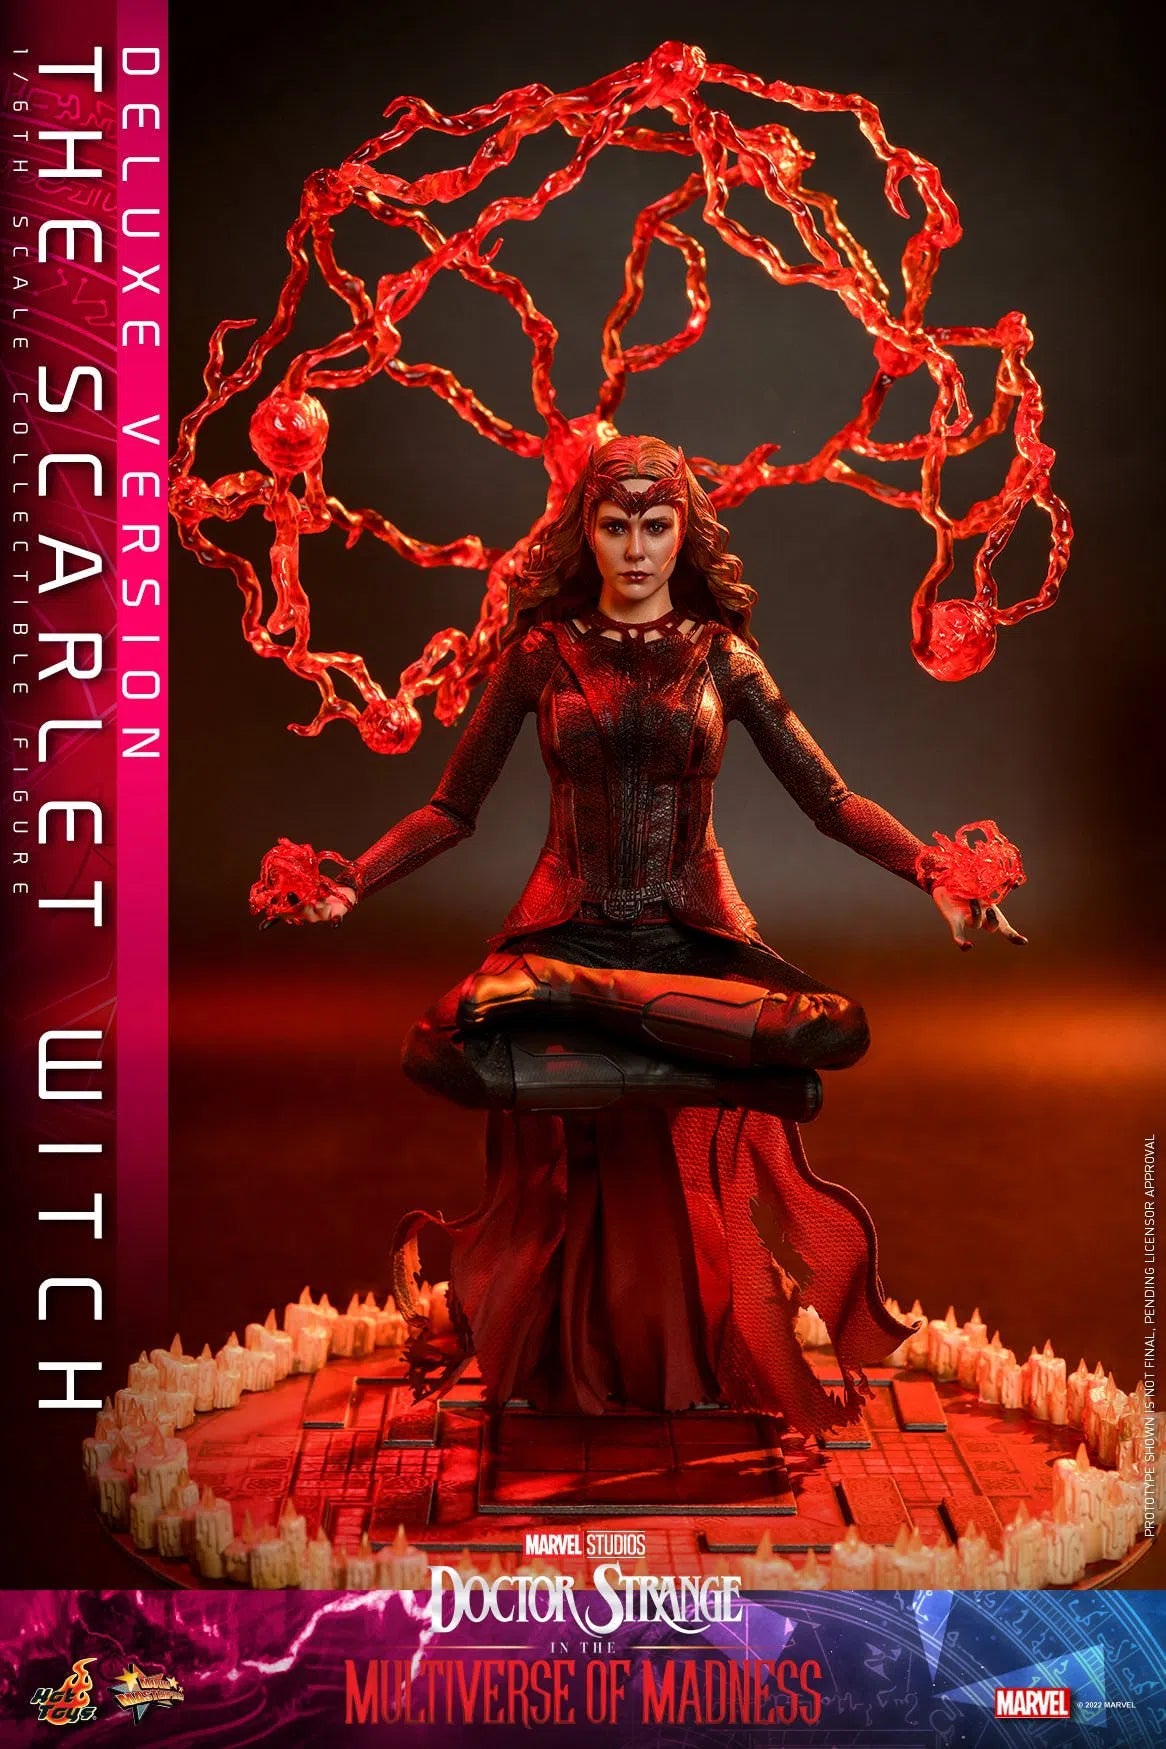 The Scarlet Witch: Deluxe: Multiverse Of Madness: Marvel: MMS653: Hot Toys